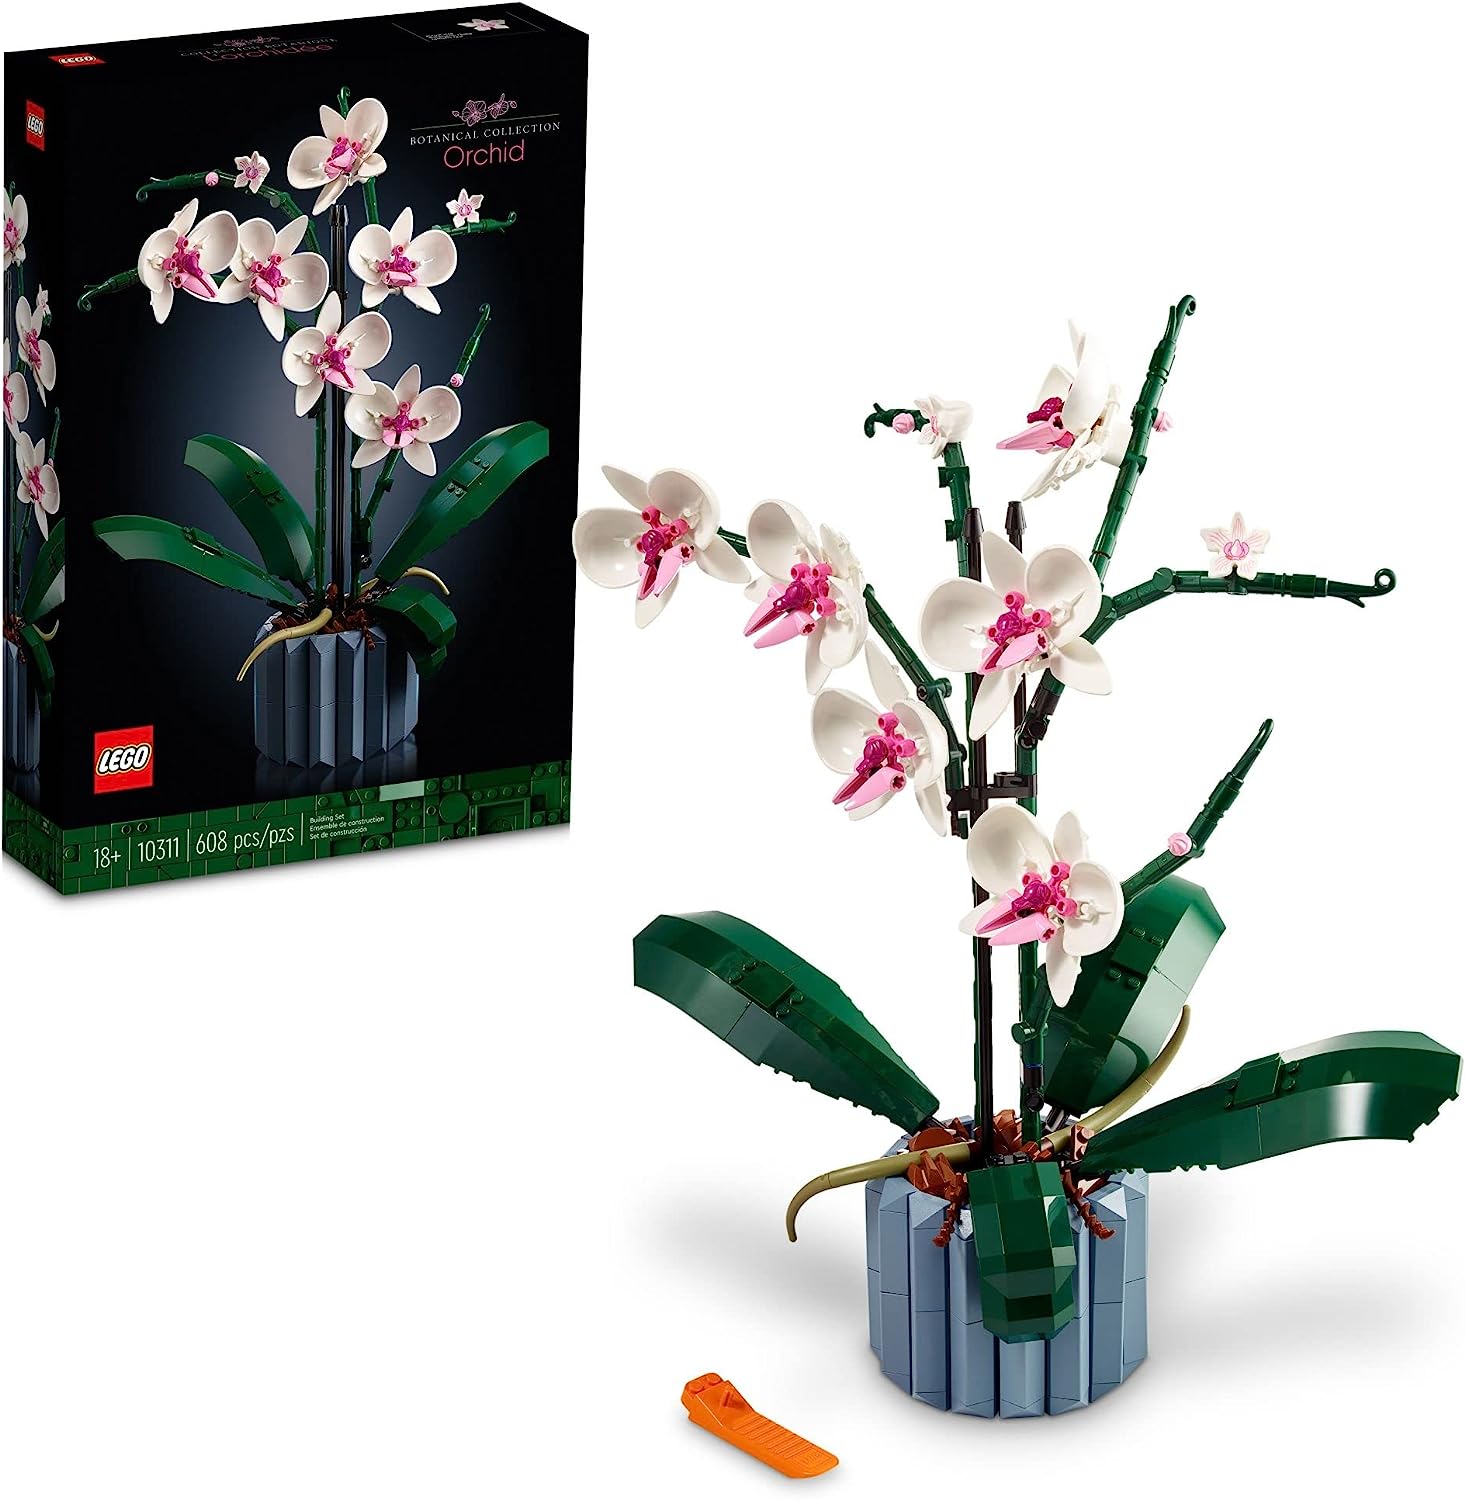 Lego 10311 - Botanical Collection Orchid – HUZZAH! Toys